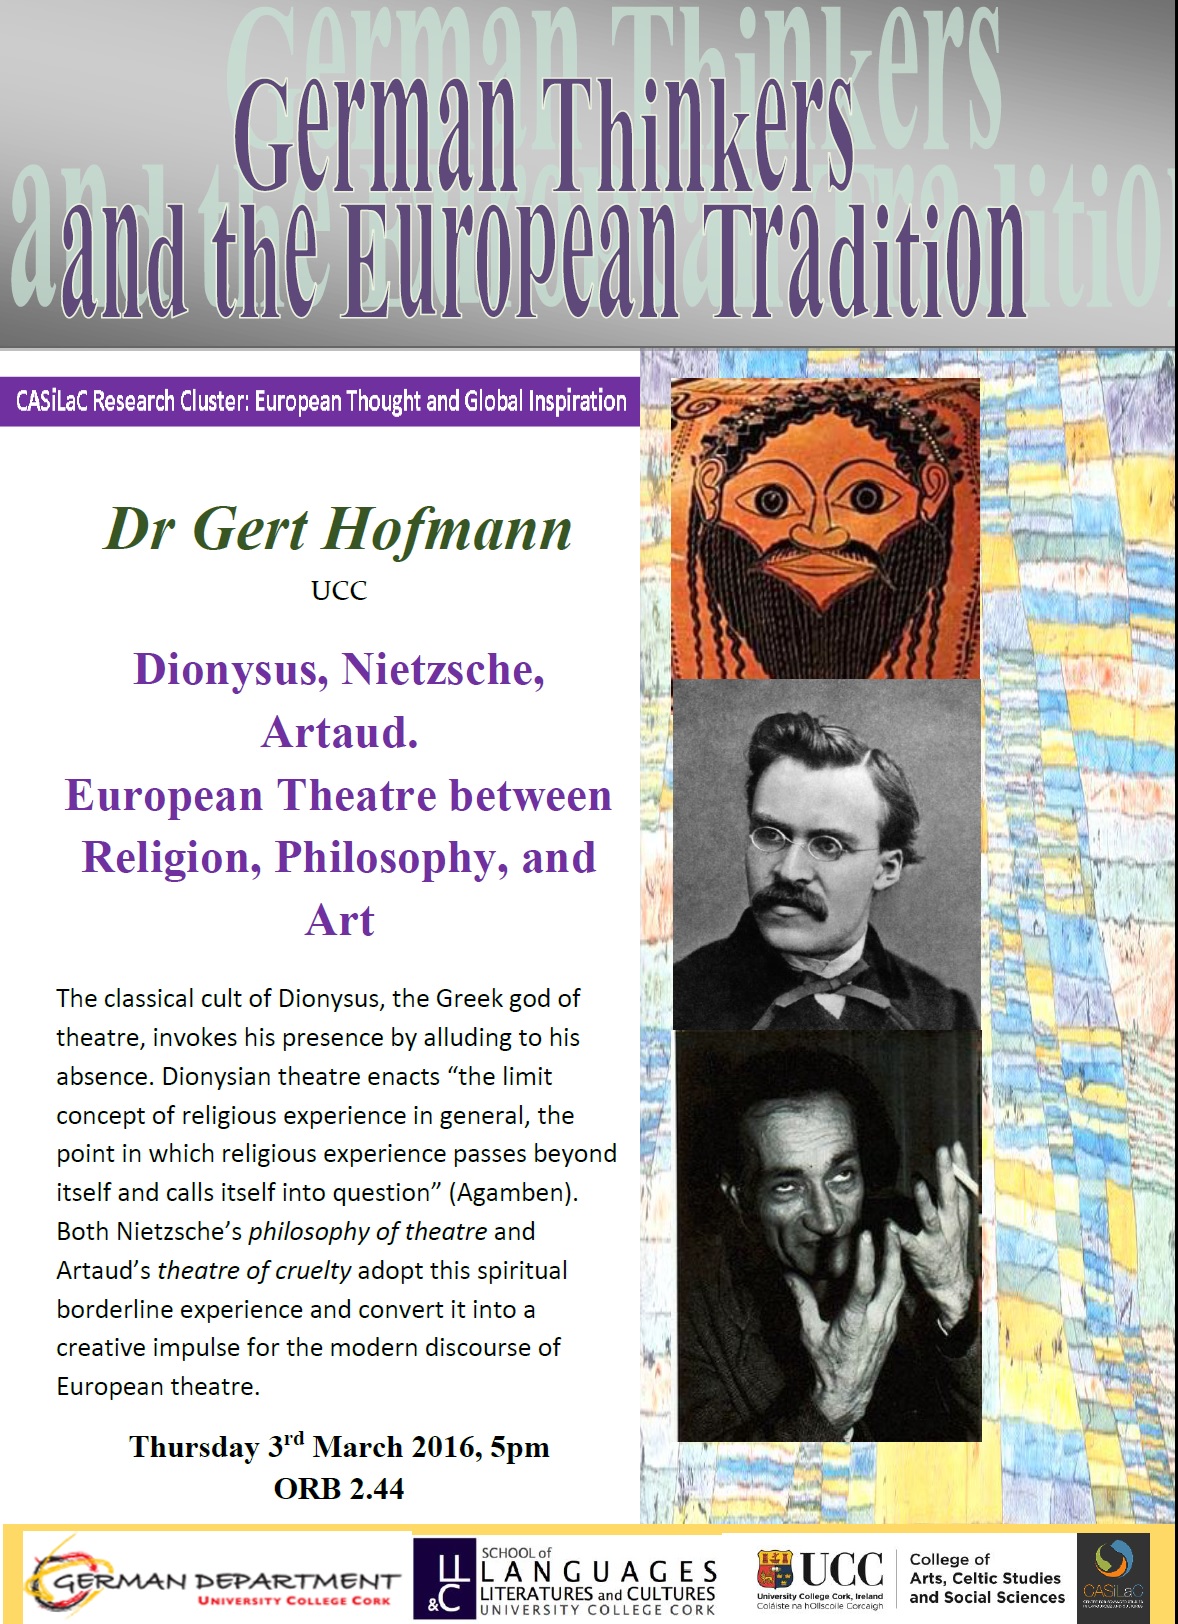 German Thinkers and the European Tradition
